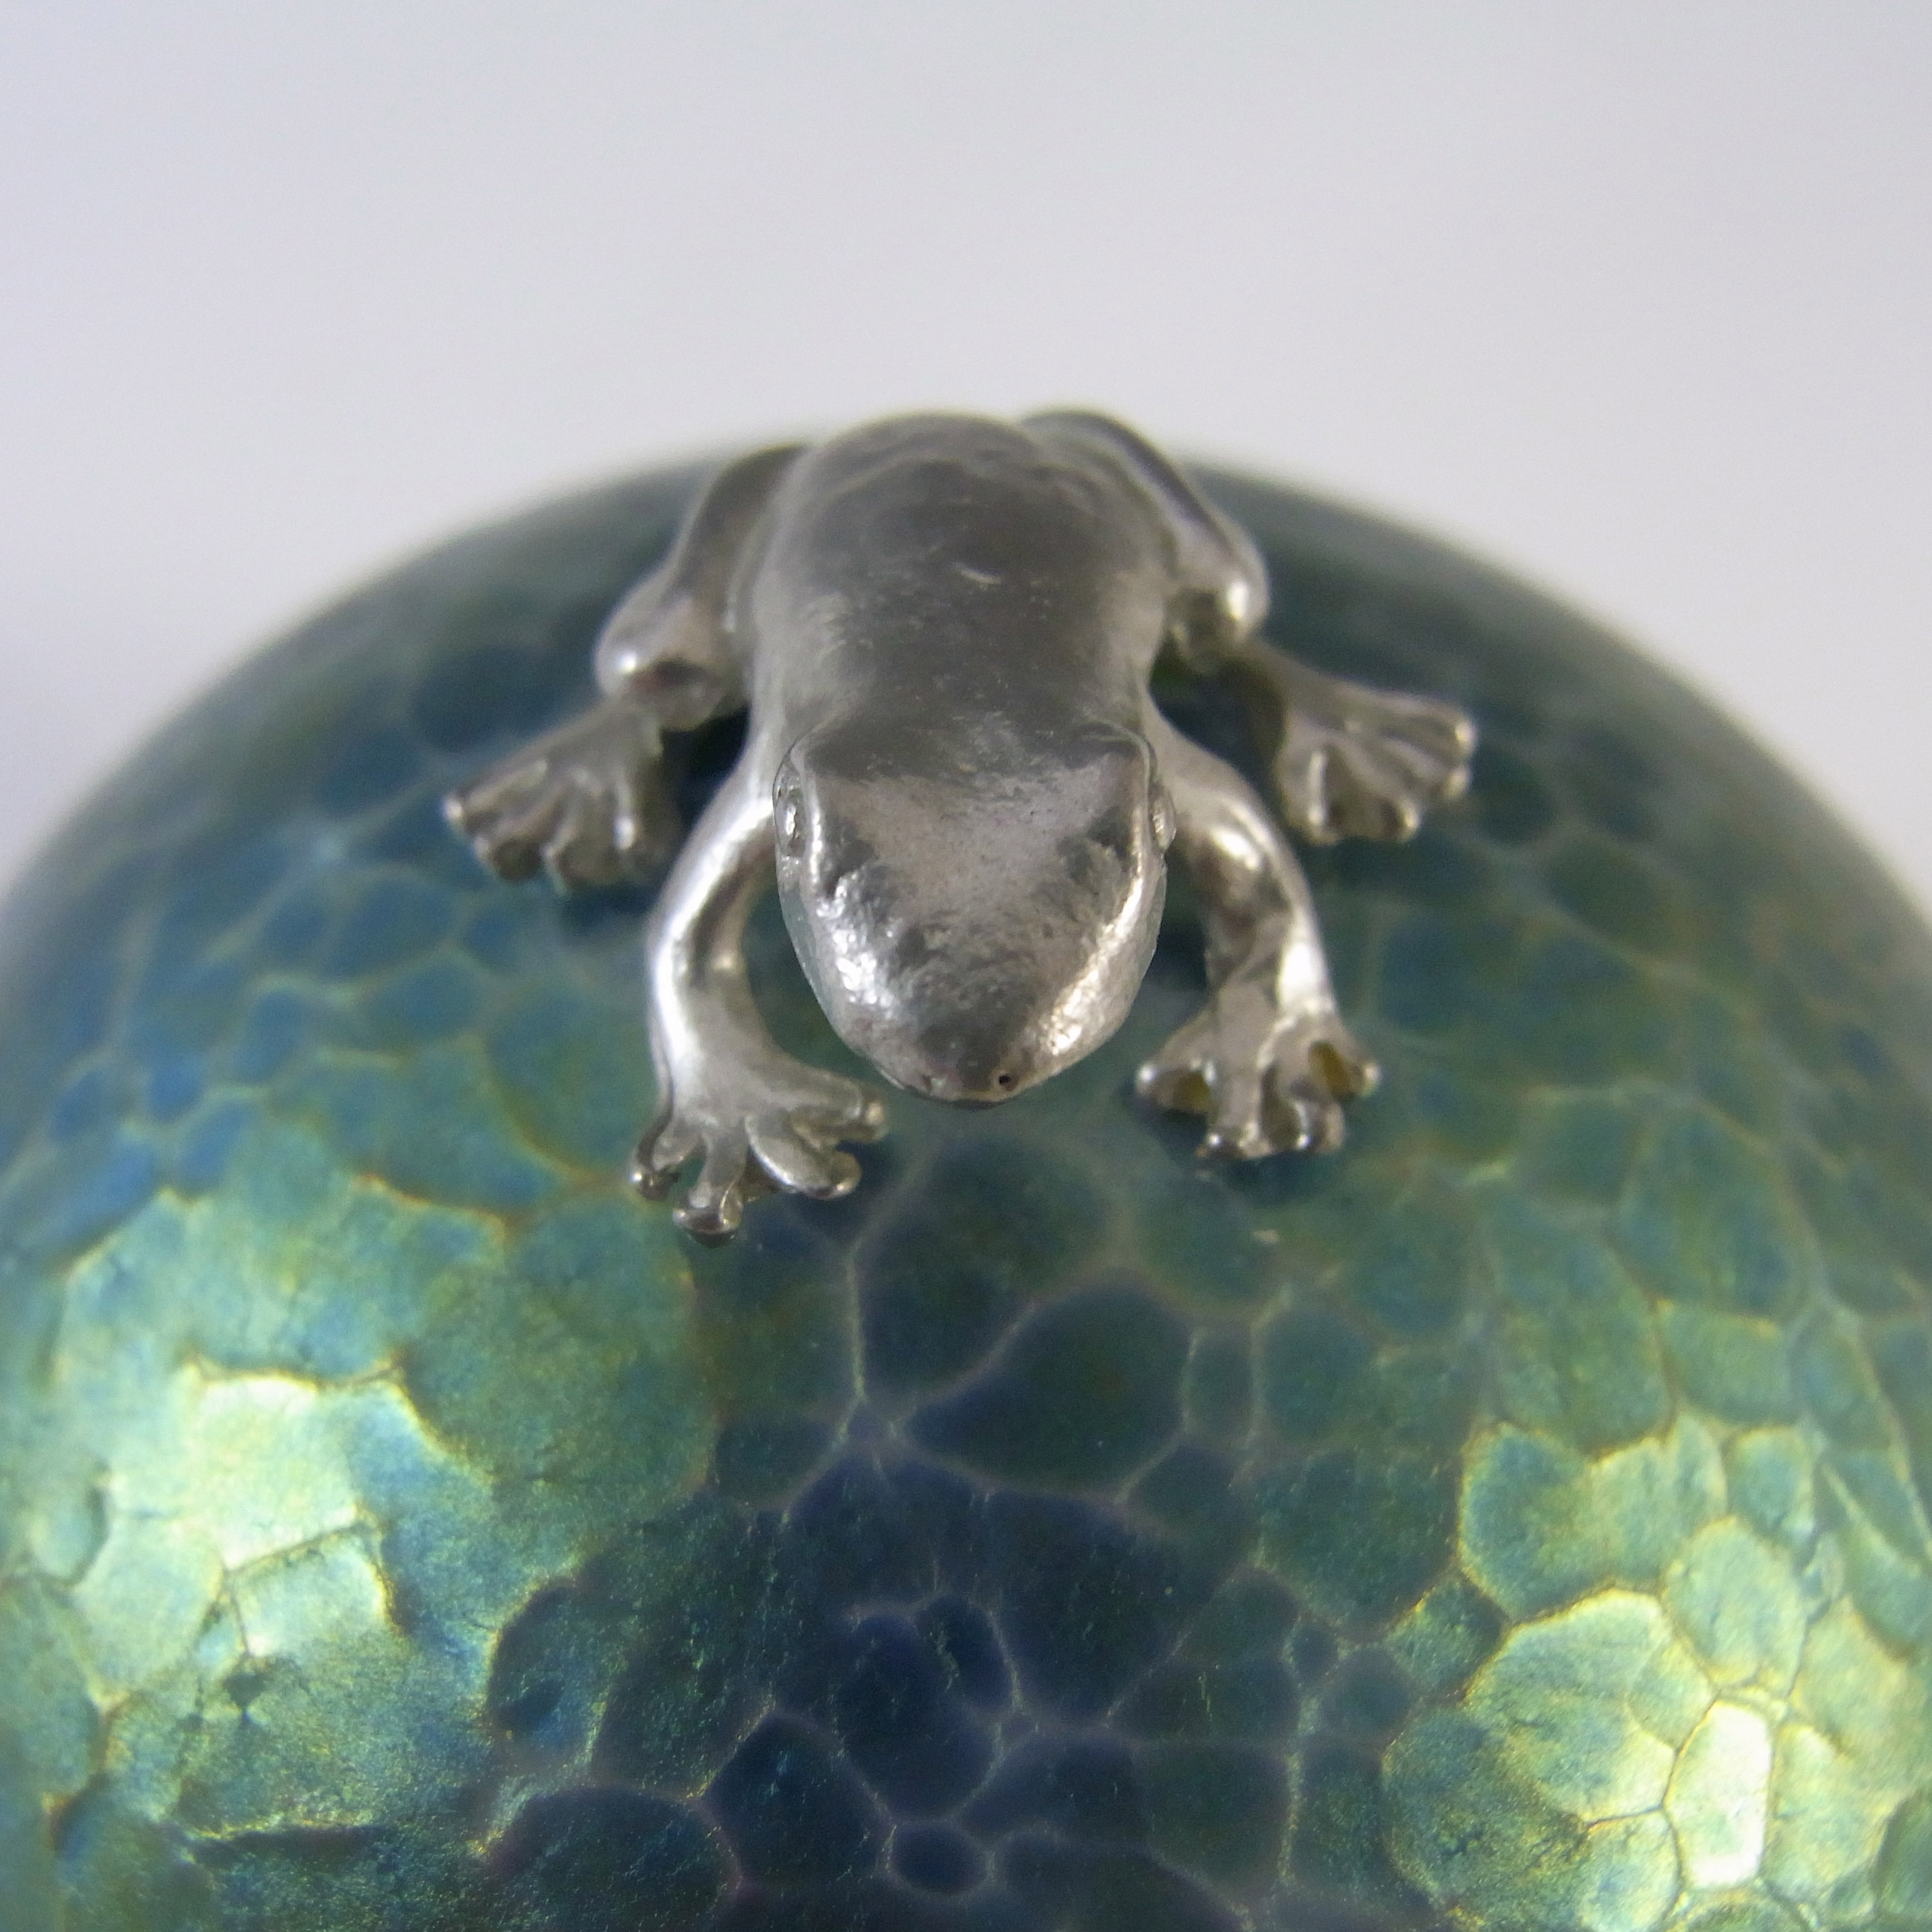 Heron Glass Blue Iridescent Pebble Paperweight & Frog Sculpture - Click Image to Close